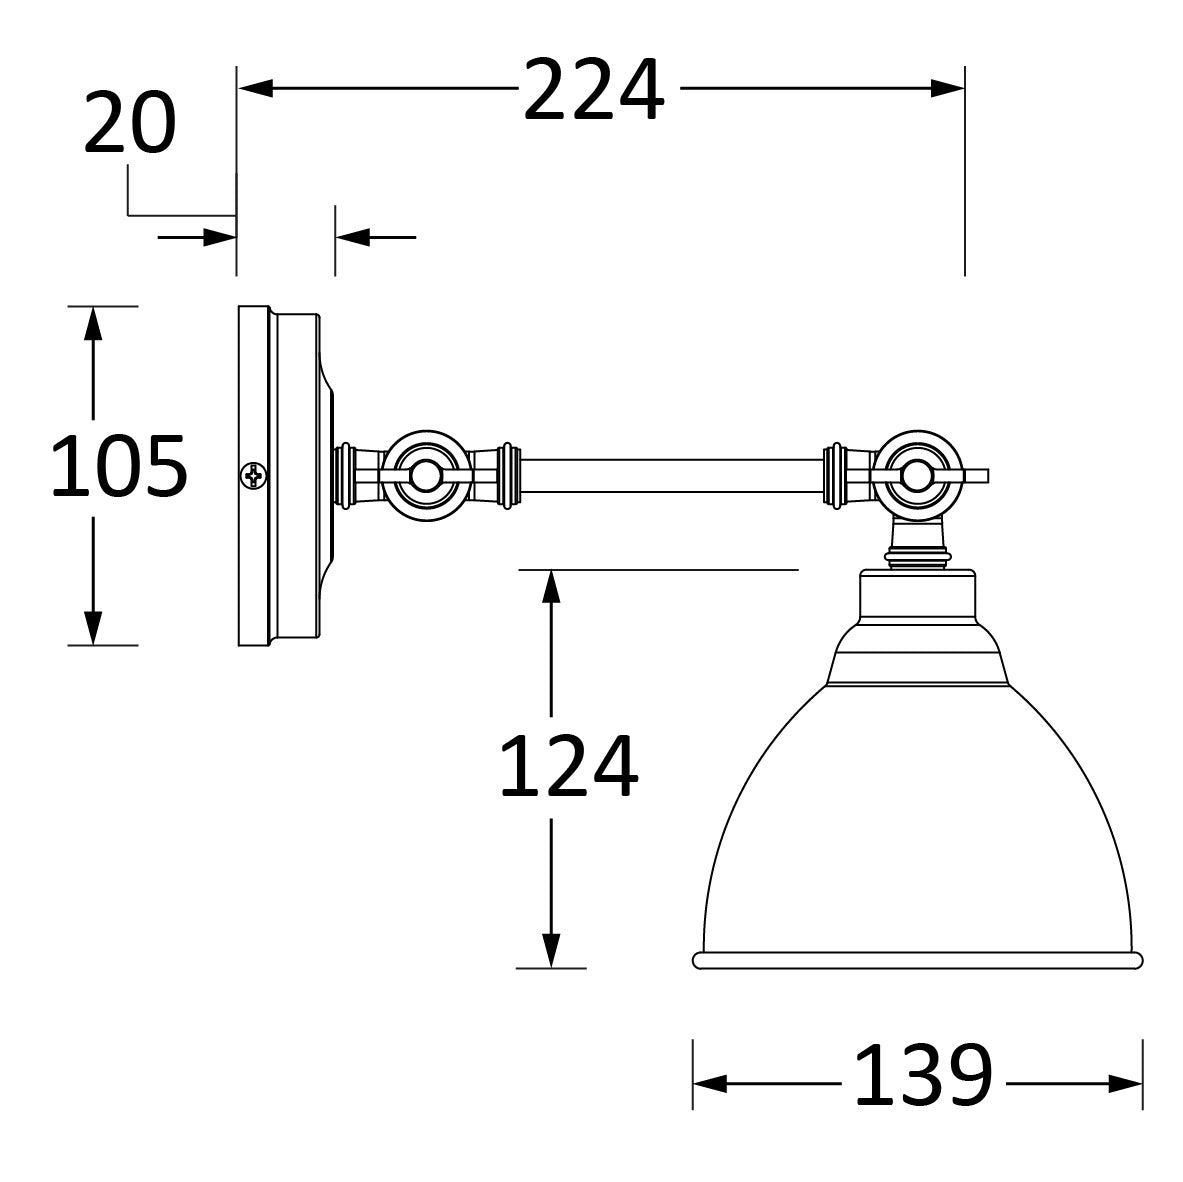 SHOW Technical Drawing of Brindley Wall Light in Tump